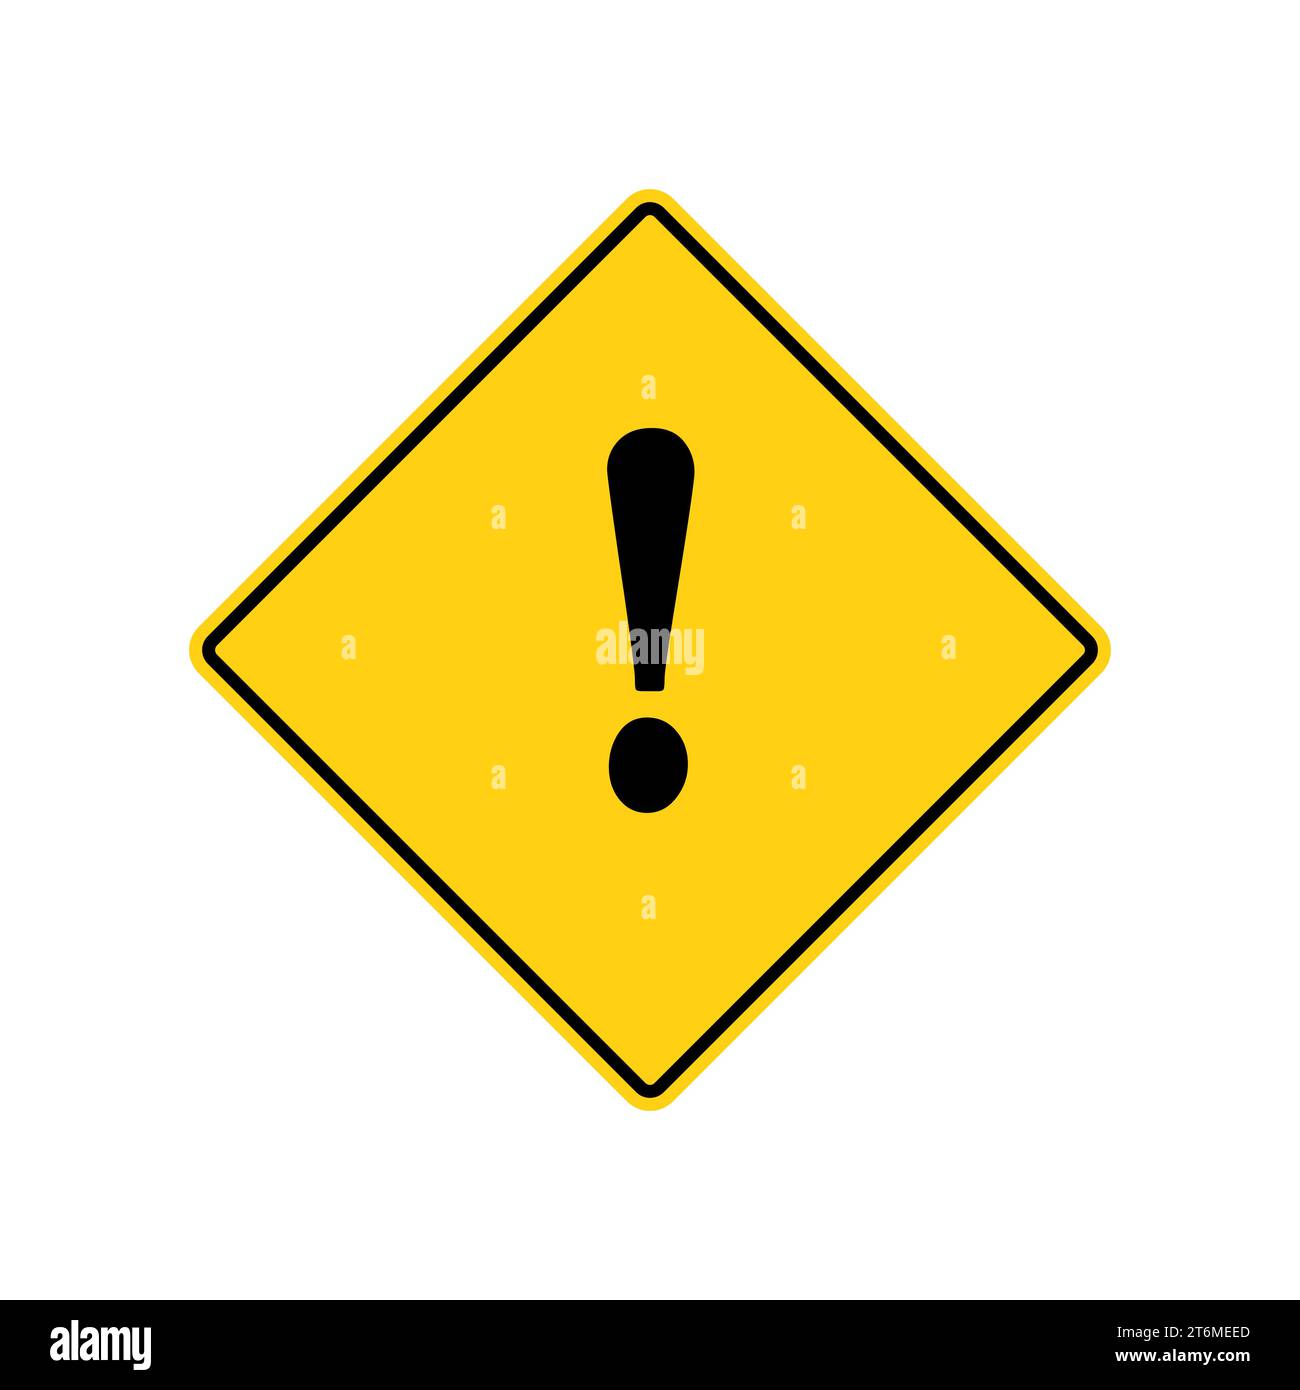 Road sign Warning or Attention Caution Sign with Exclamation Mark Flat Icon Vector Image. Stock Vector